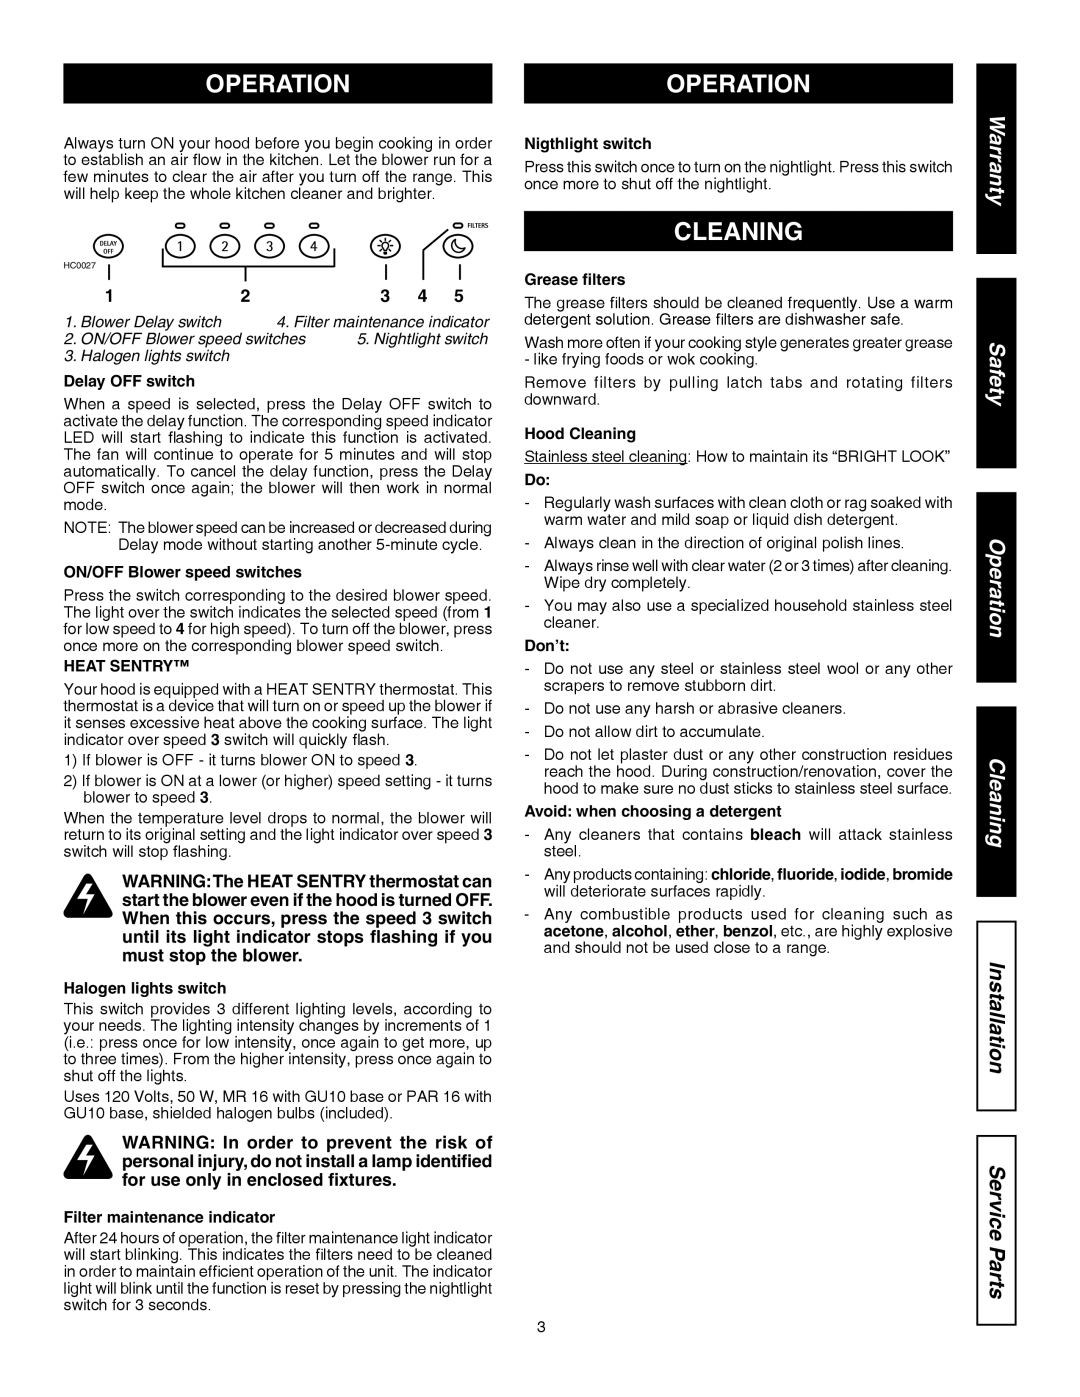 Kenmore 31130, 31133 installation manual Warranty, Safety Operation Cleaning, Installation Service Parts 